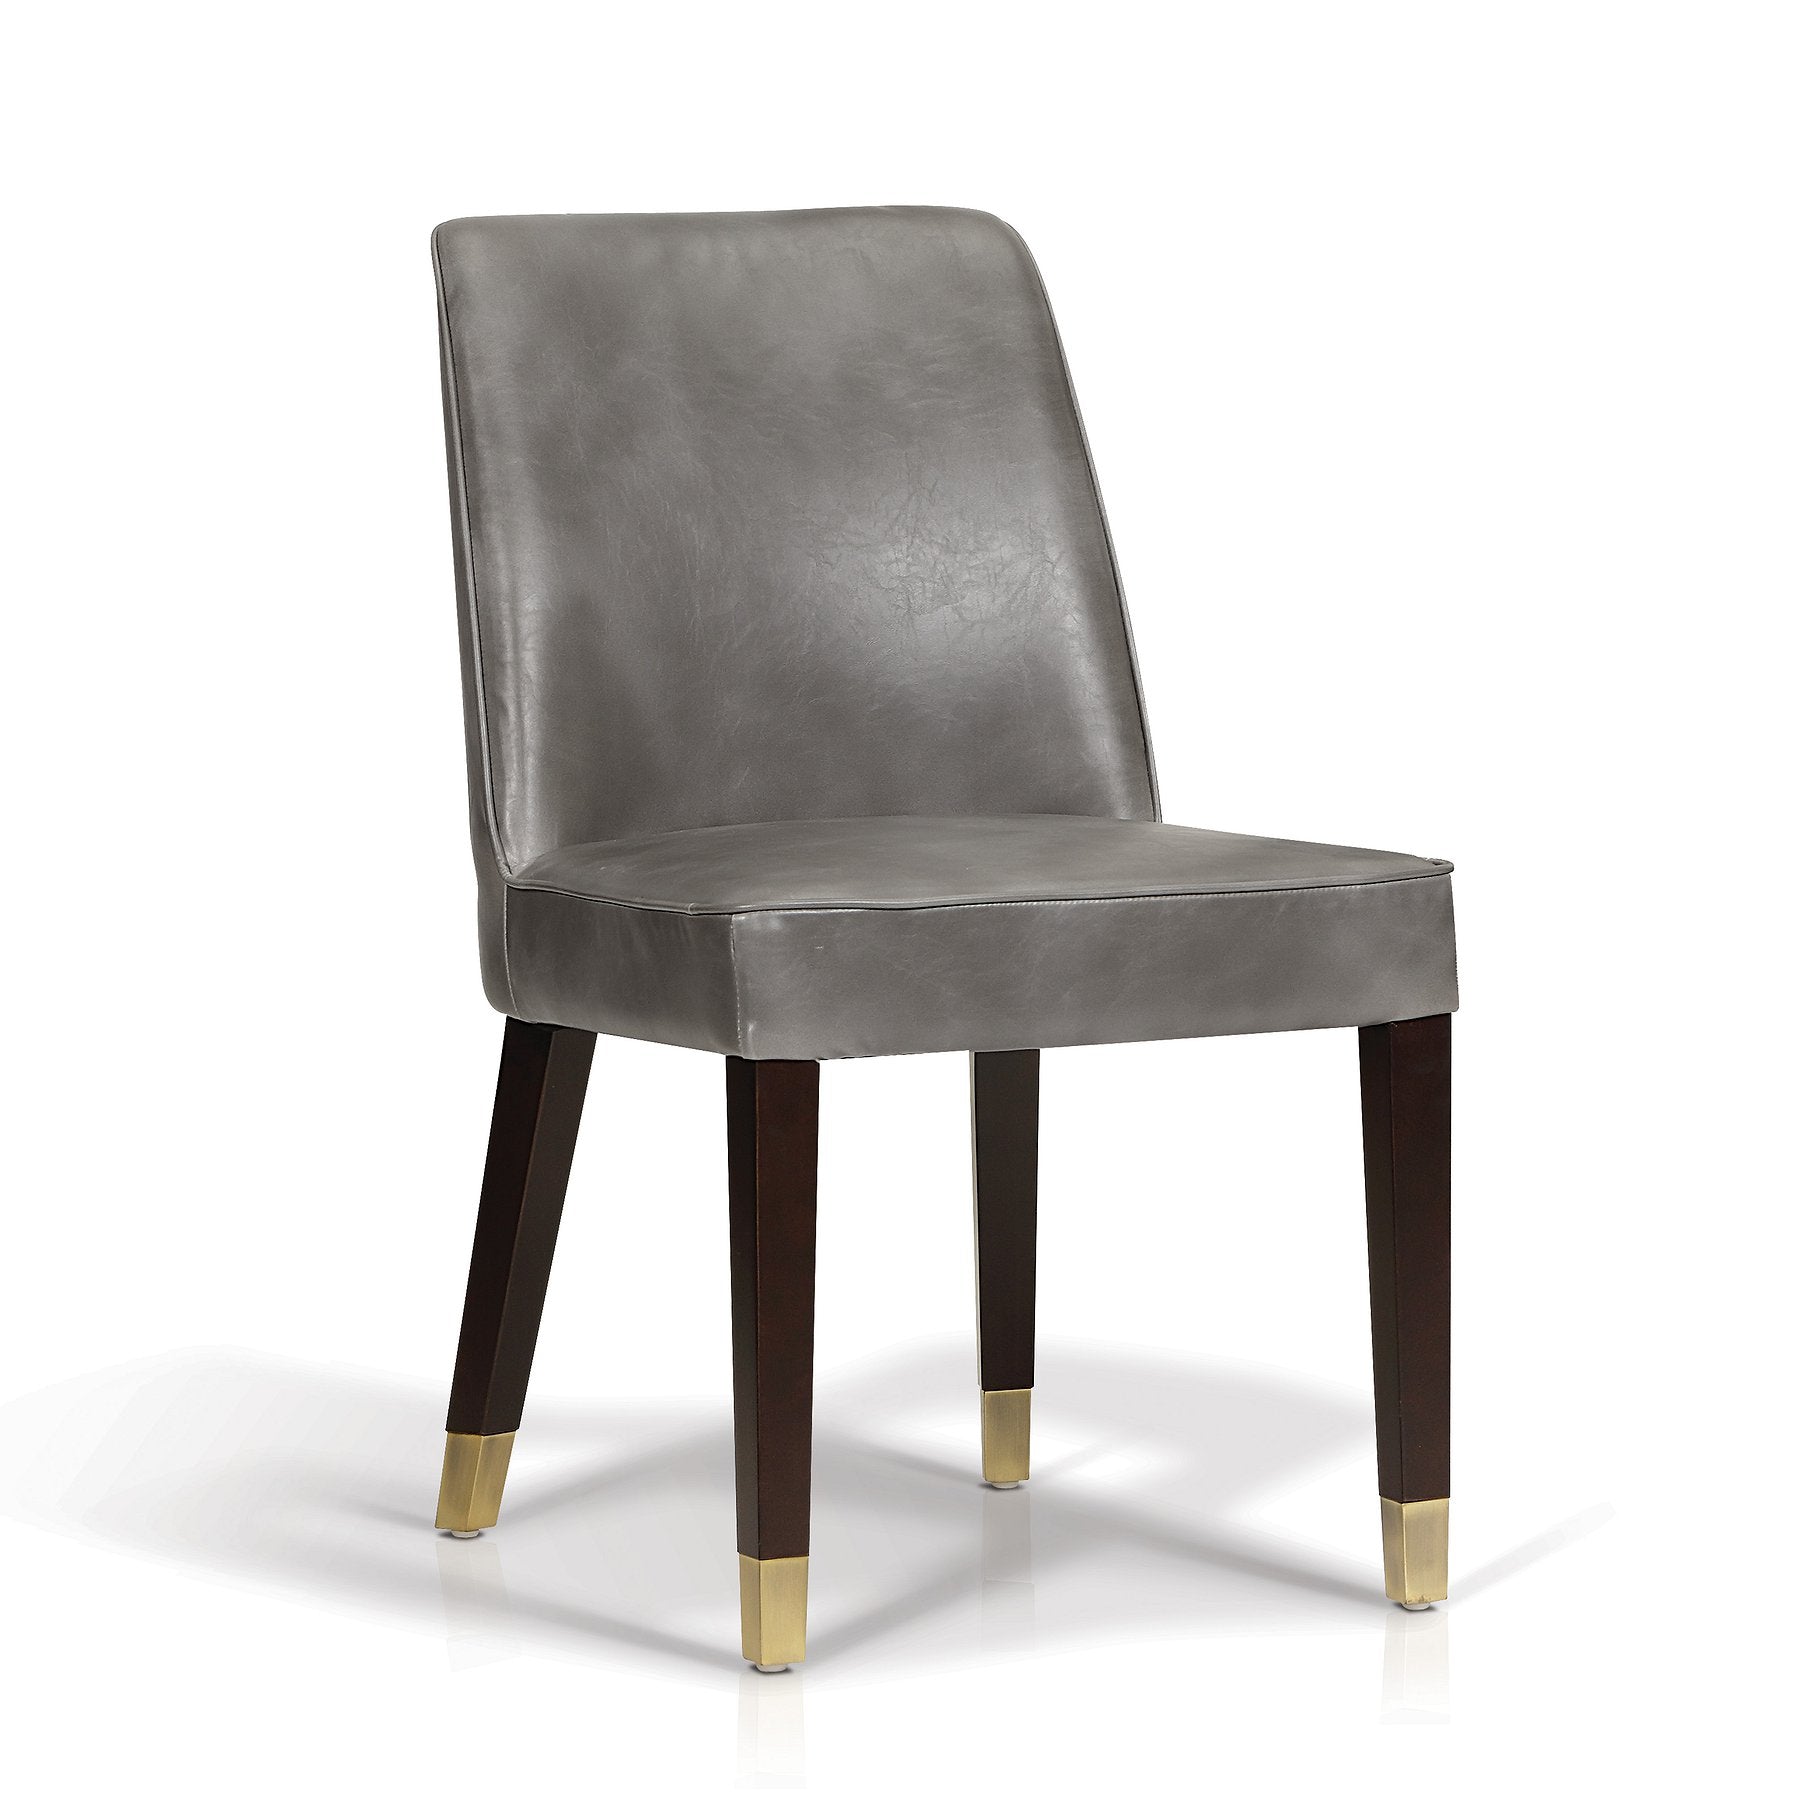 SKY13057 kerry - dining chair - Dreamart Gallery